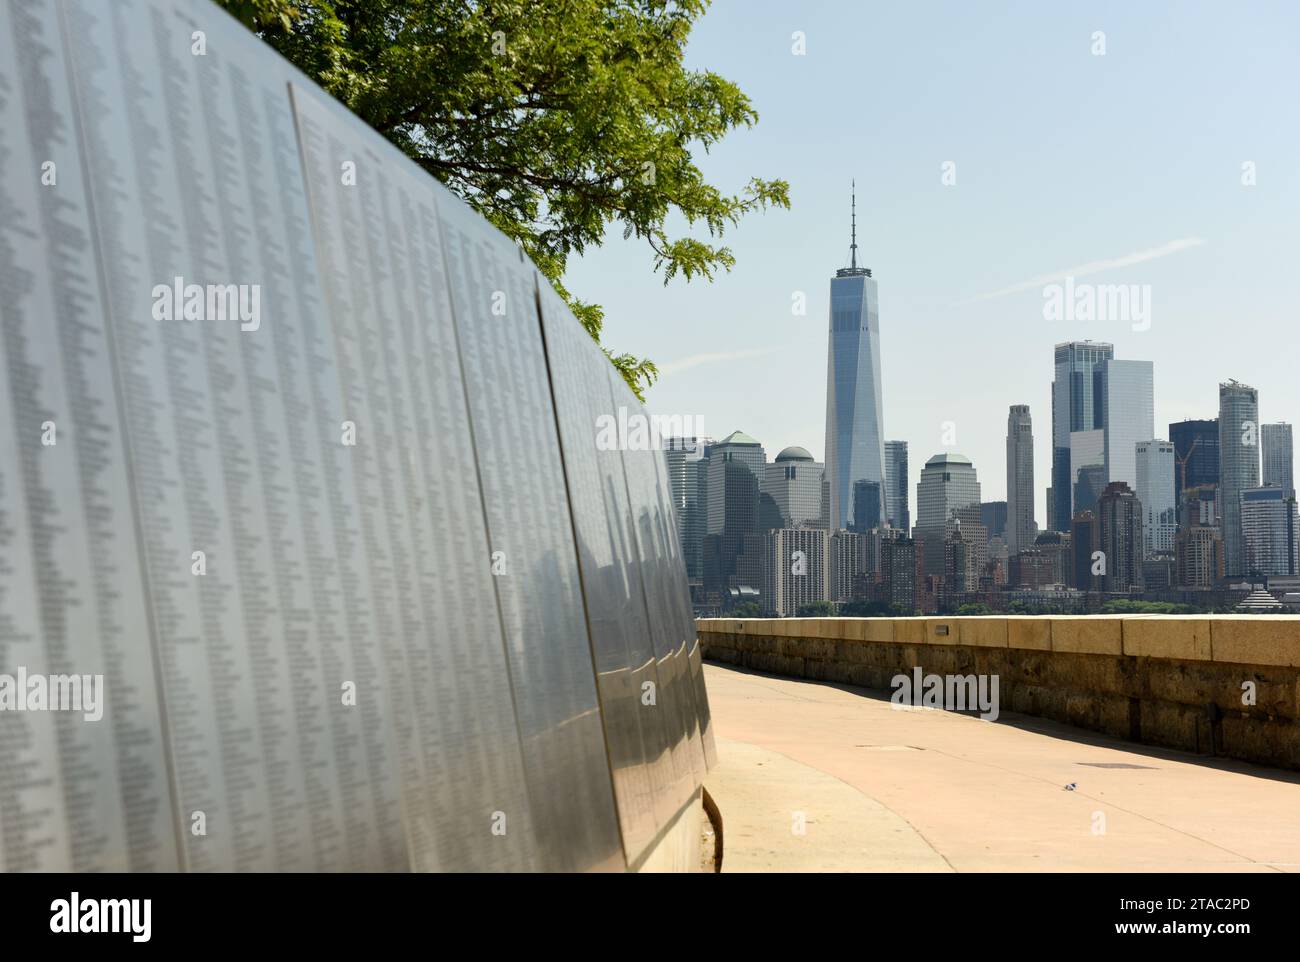 New York, USA - June 09, 2018: The American Immigrant Wall of Honor is located at the Ellis Island National Museum overlooks the Lower Manhattan skyli Stock Photo